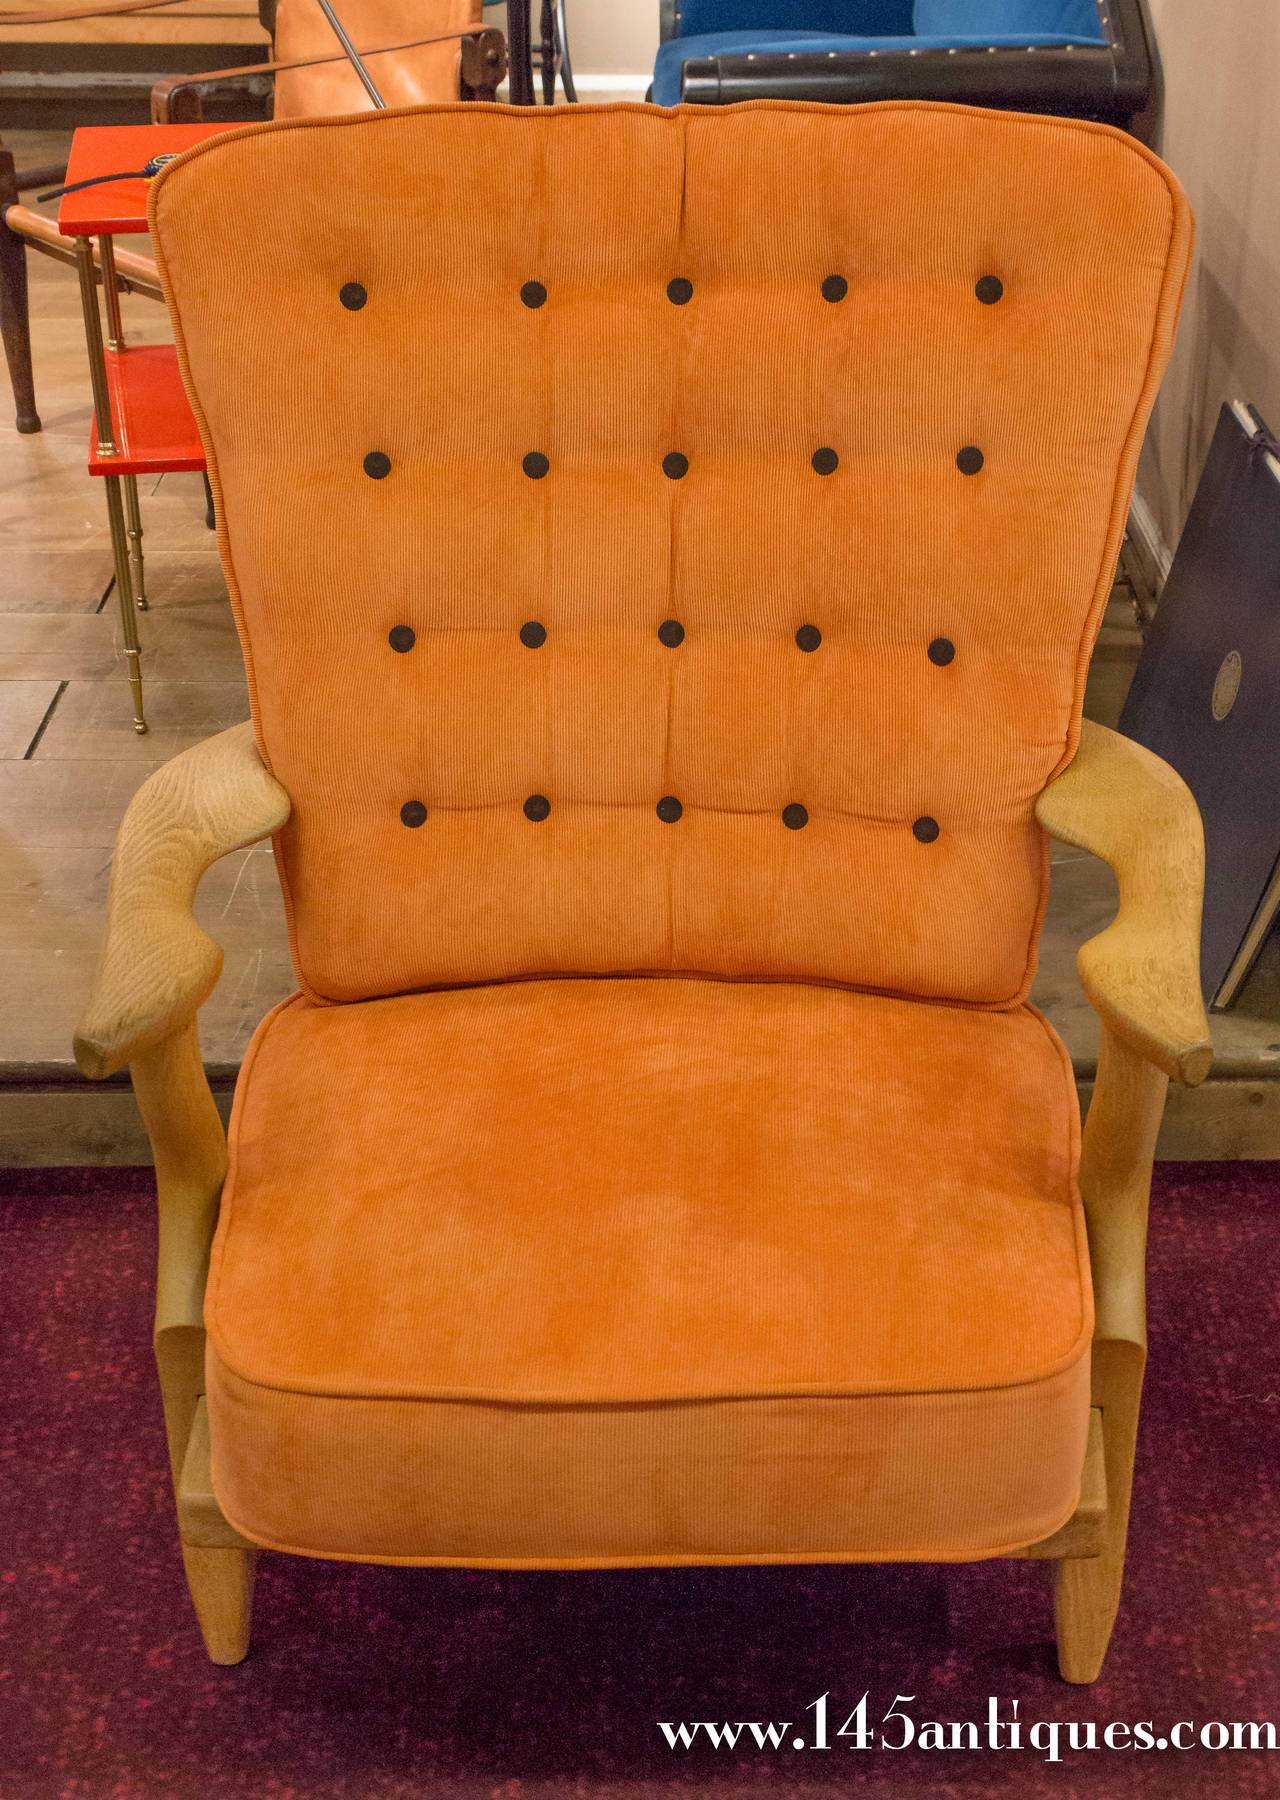 Very nice pair of oak armchairs recently reupholstered in orange corduroy fabric with contrasting dark brown buttons. 

Item located in France, please allow 5 to 10 weeks delivery to New York City. Price includes regular shipping to New York.